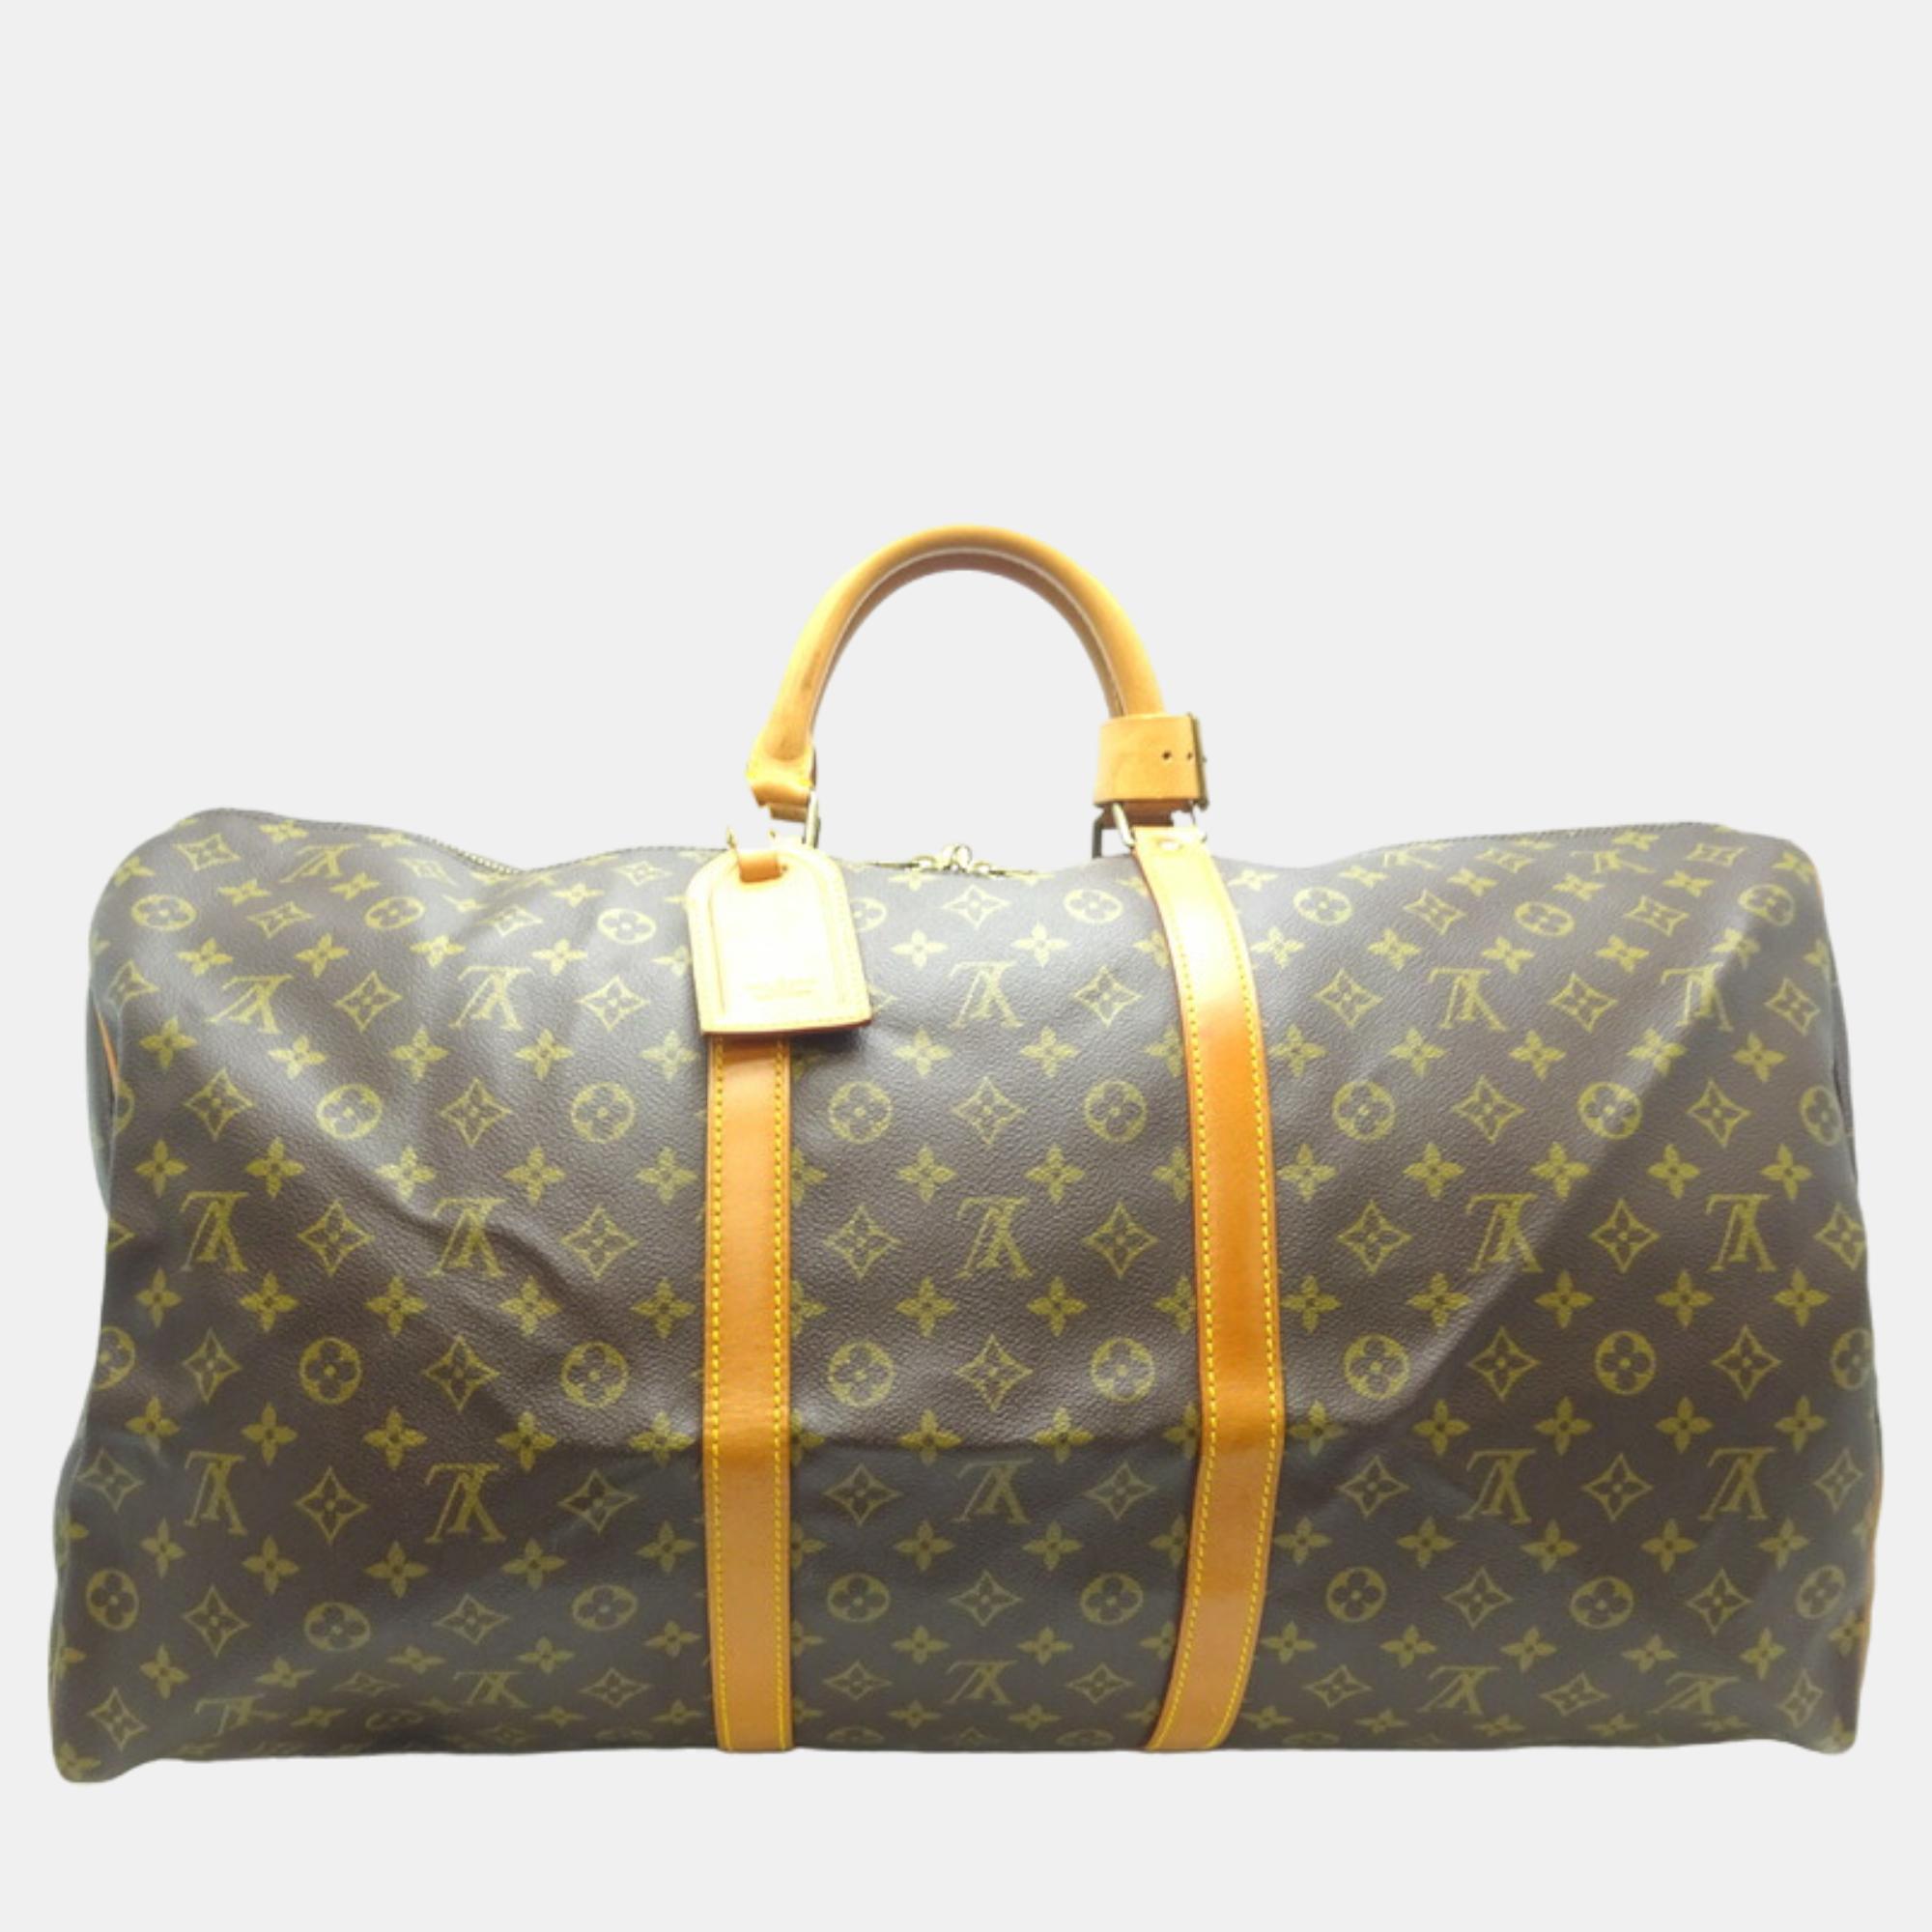 Fashion lovers naturally like to travel in style and at such times only the best travel handbag will do. Thats why it is wise to opt for this Louis Vuitton Keepall as it is well crafted and well designed to grace you with style.